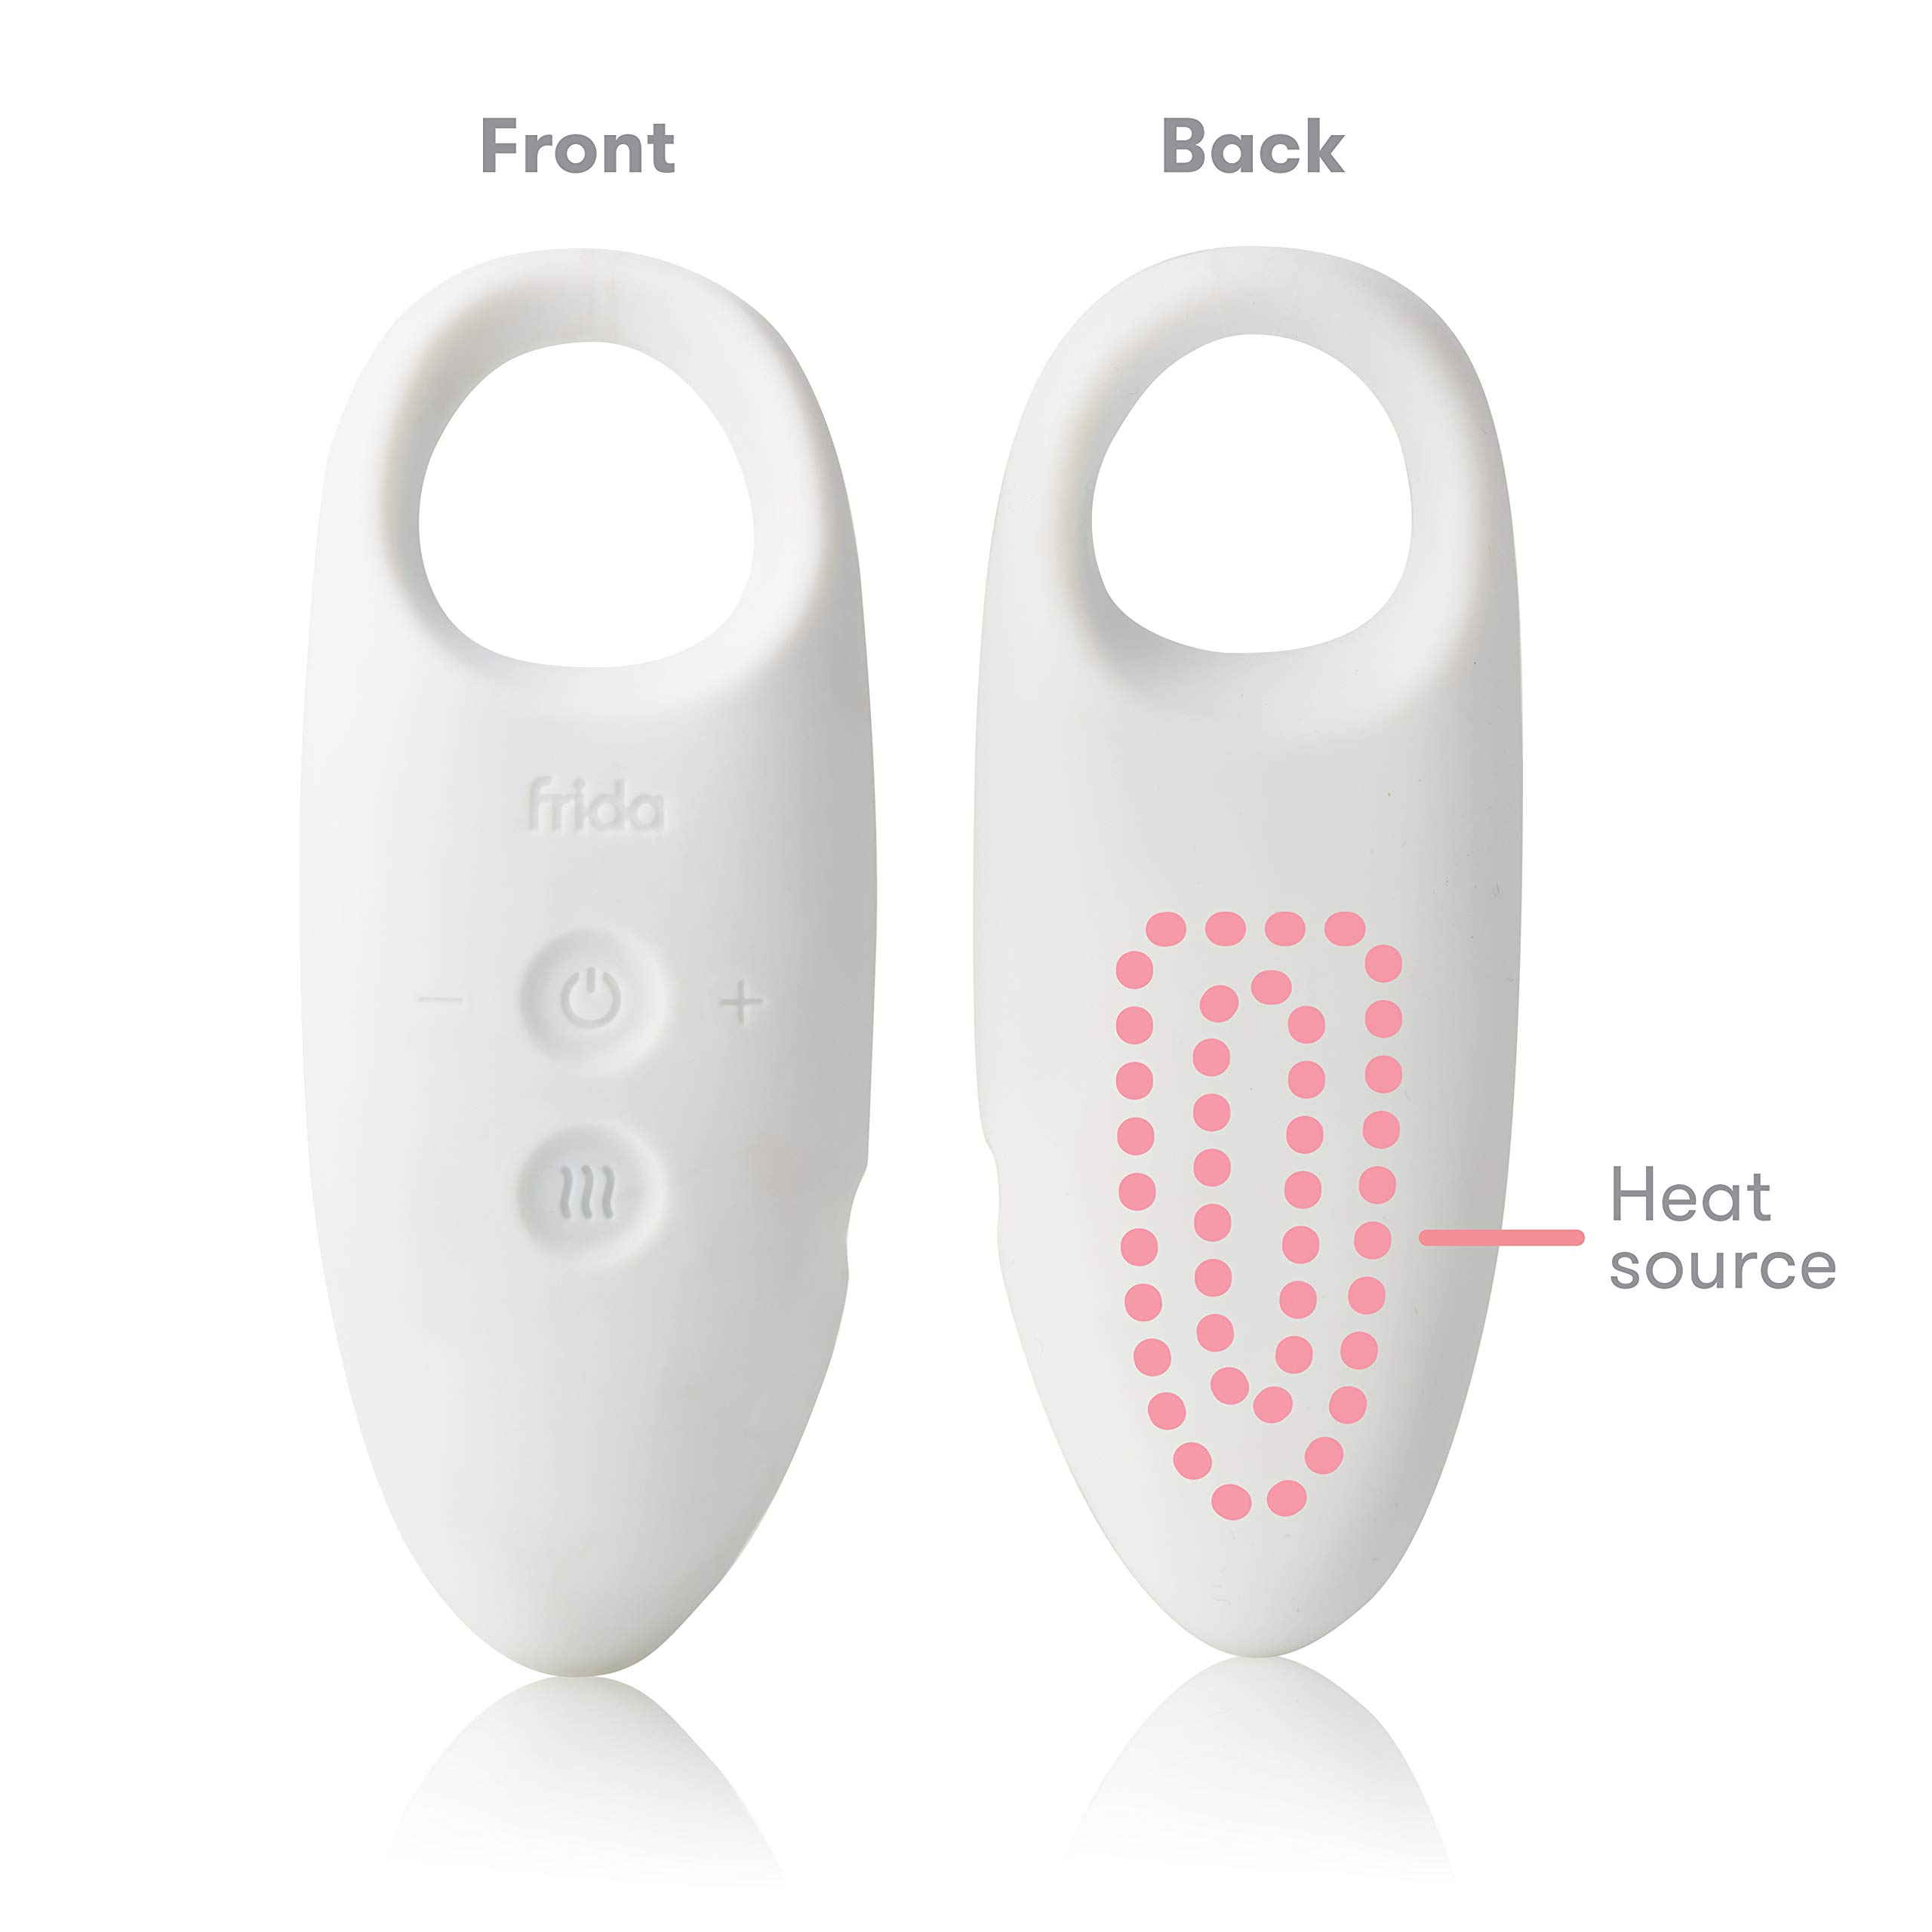 Frida Mom 2-in-1 Lactation Massager - Multiple Modes of Heat + Vibration for Clogged Milk Ducts, Increase Milk Flow, Breast Engorgement - USB Cord Included